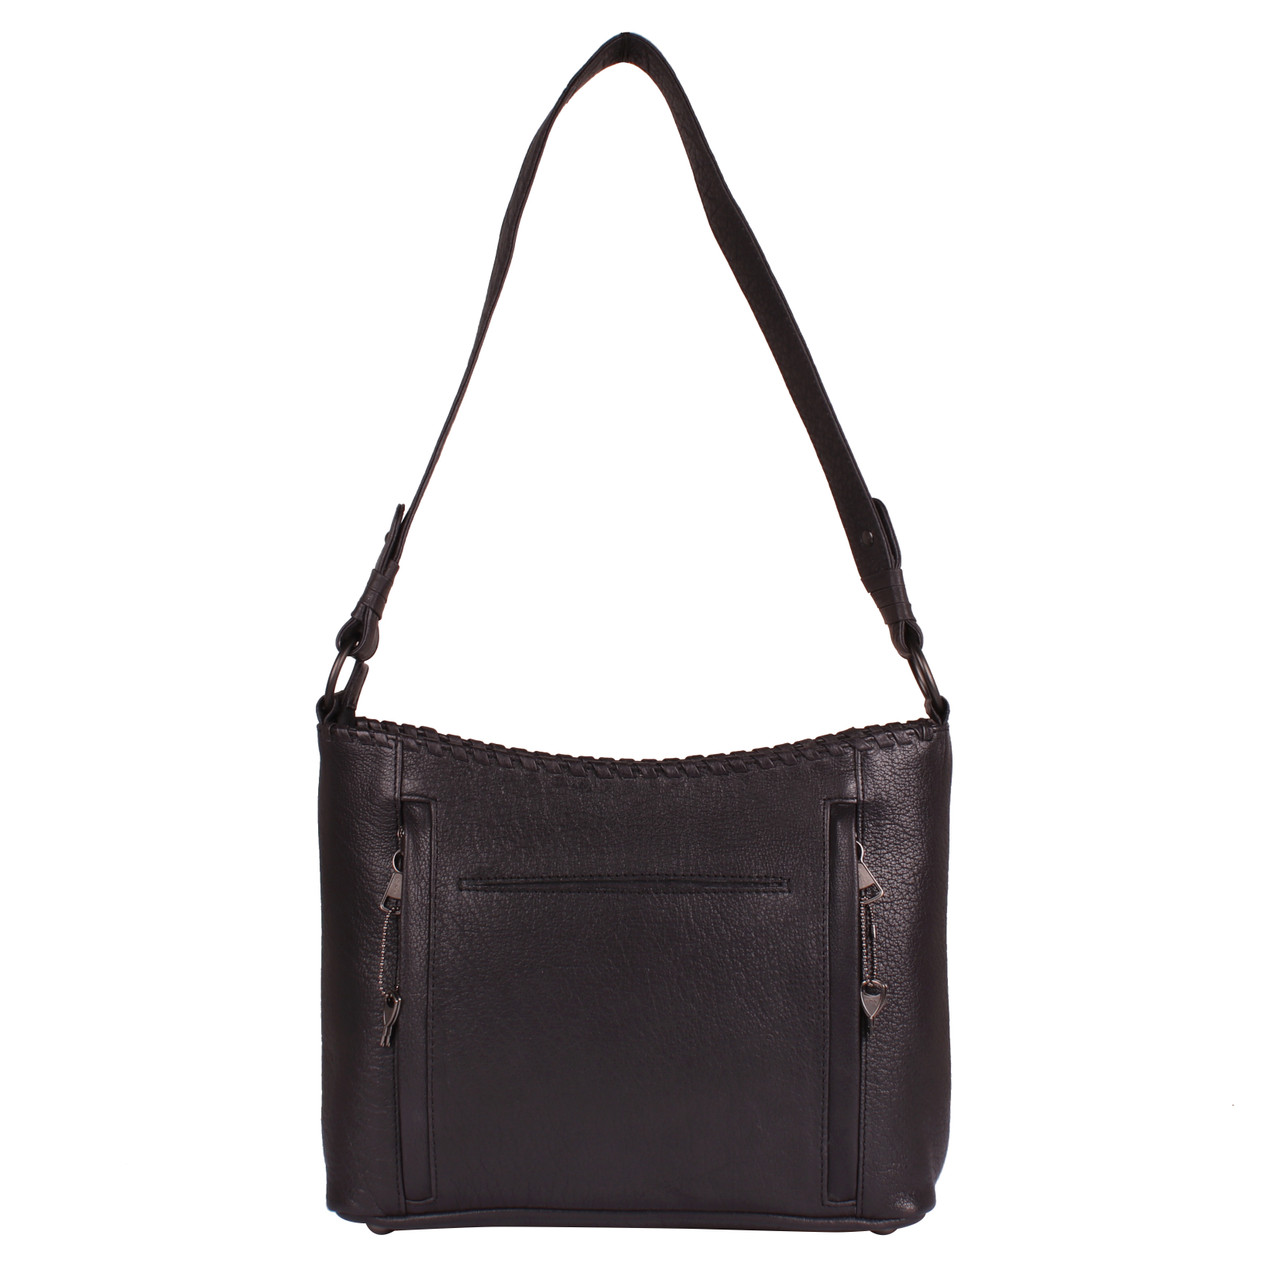 Juliana Leather Concealed Carry Hobo